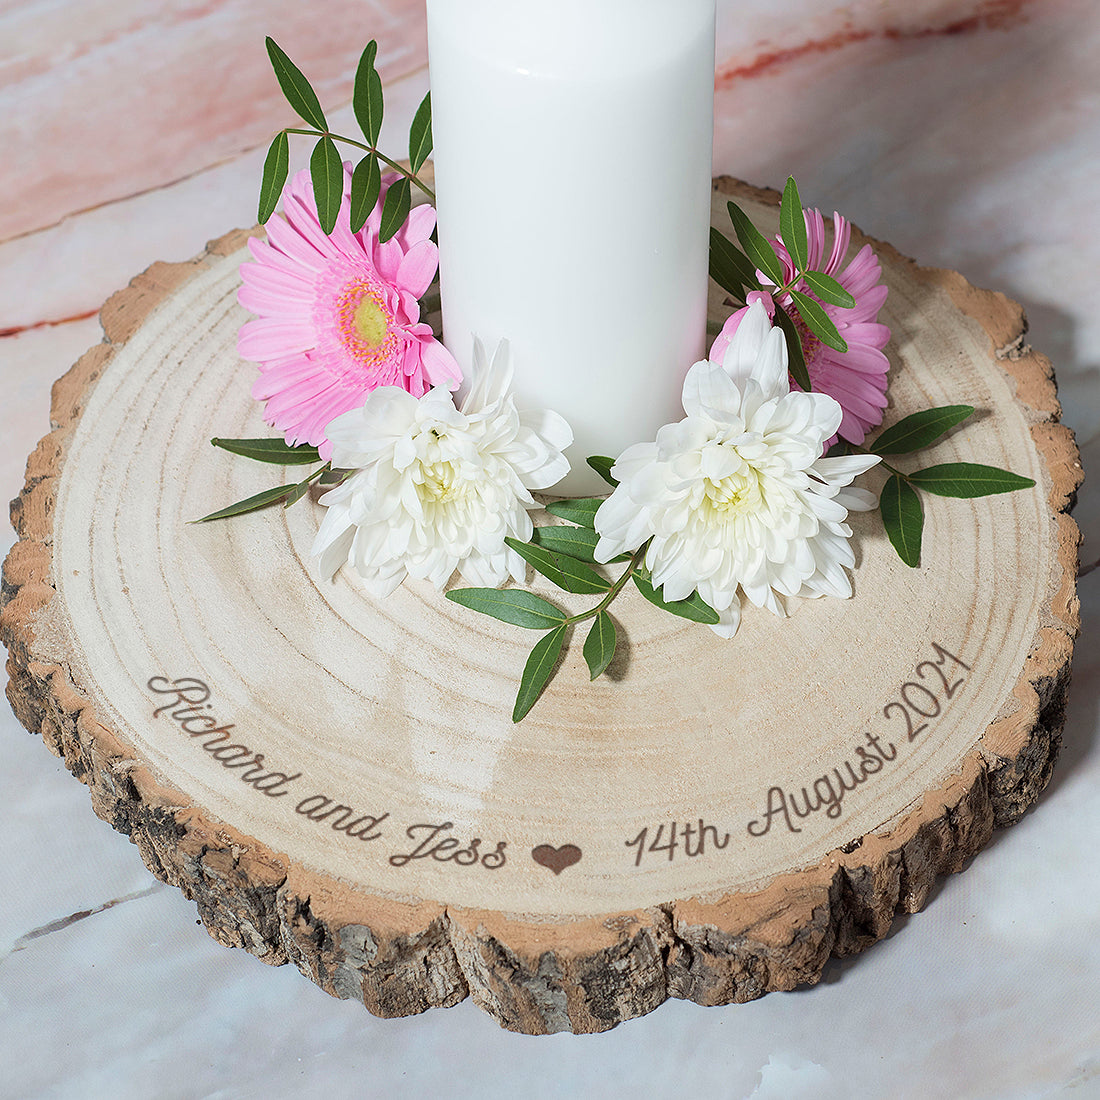 Rustic Names and Wedding Date Wood Slice Table Centrepiece Decor-Weddings by Lumi